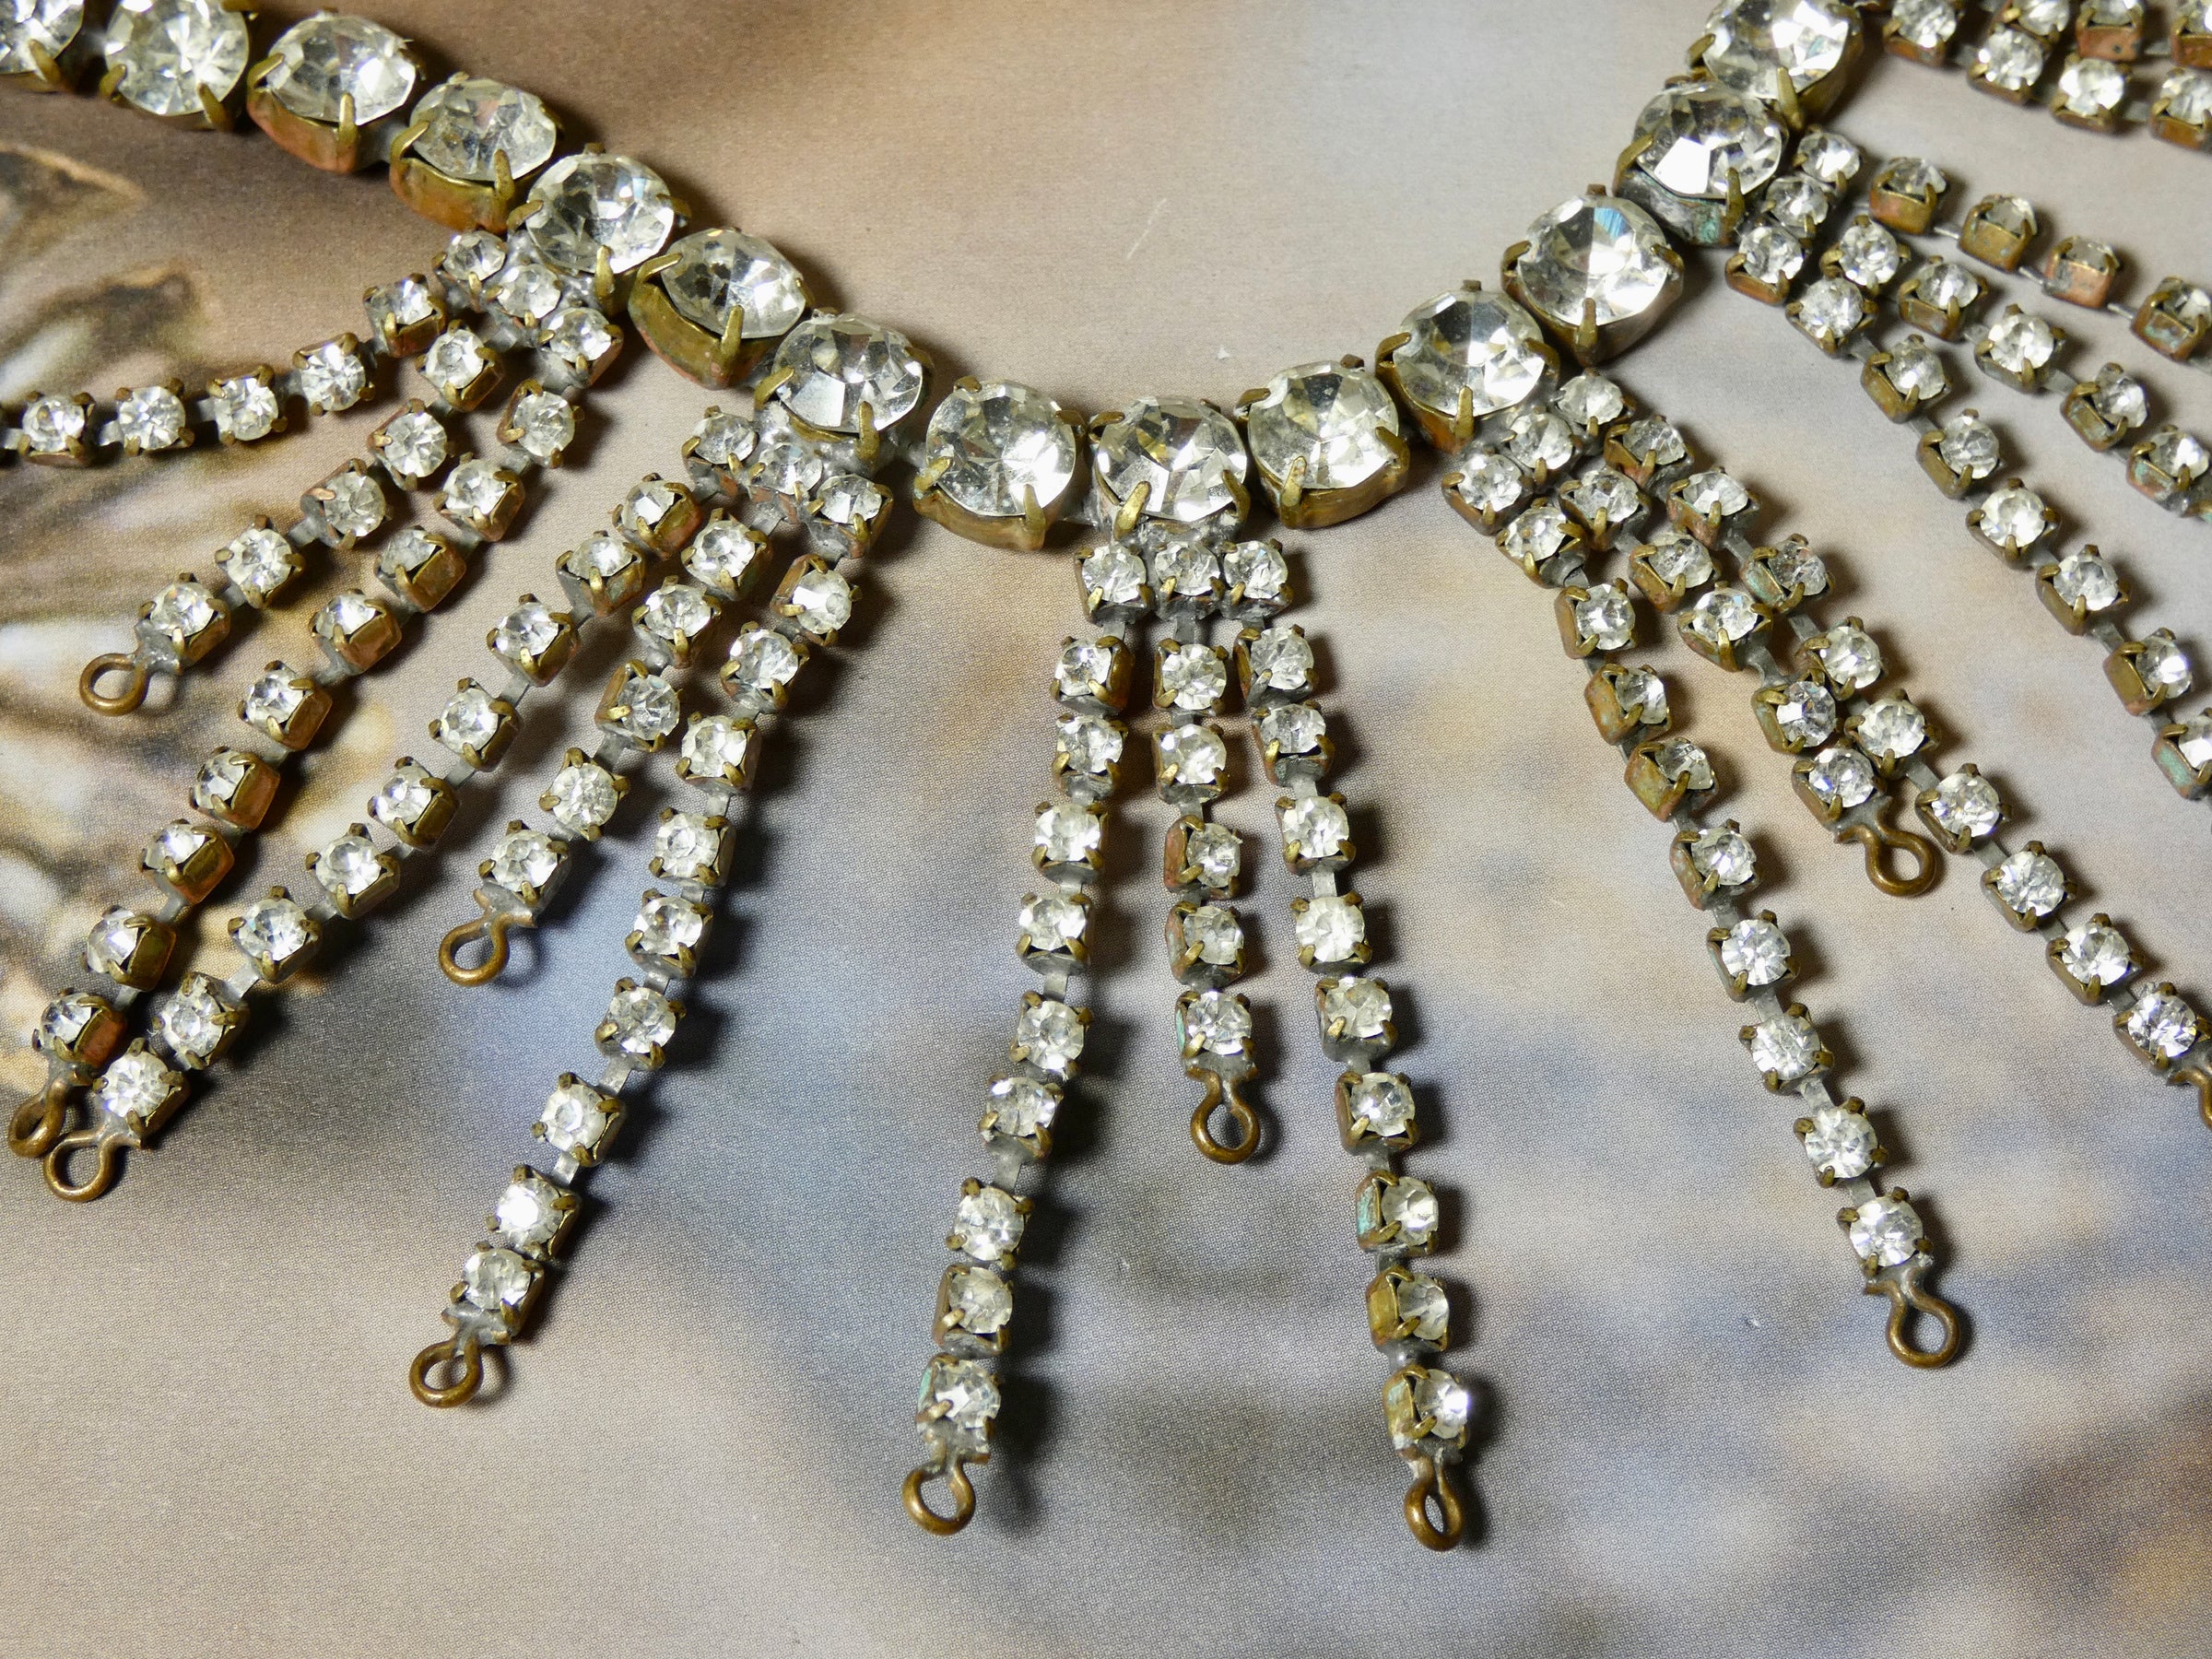 One of a Kind Vintage Rhinestone Statement Necklace, A perfect Display Necklace